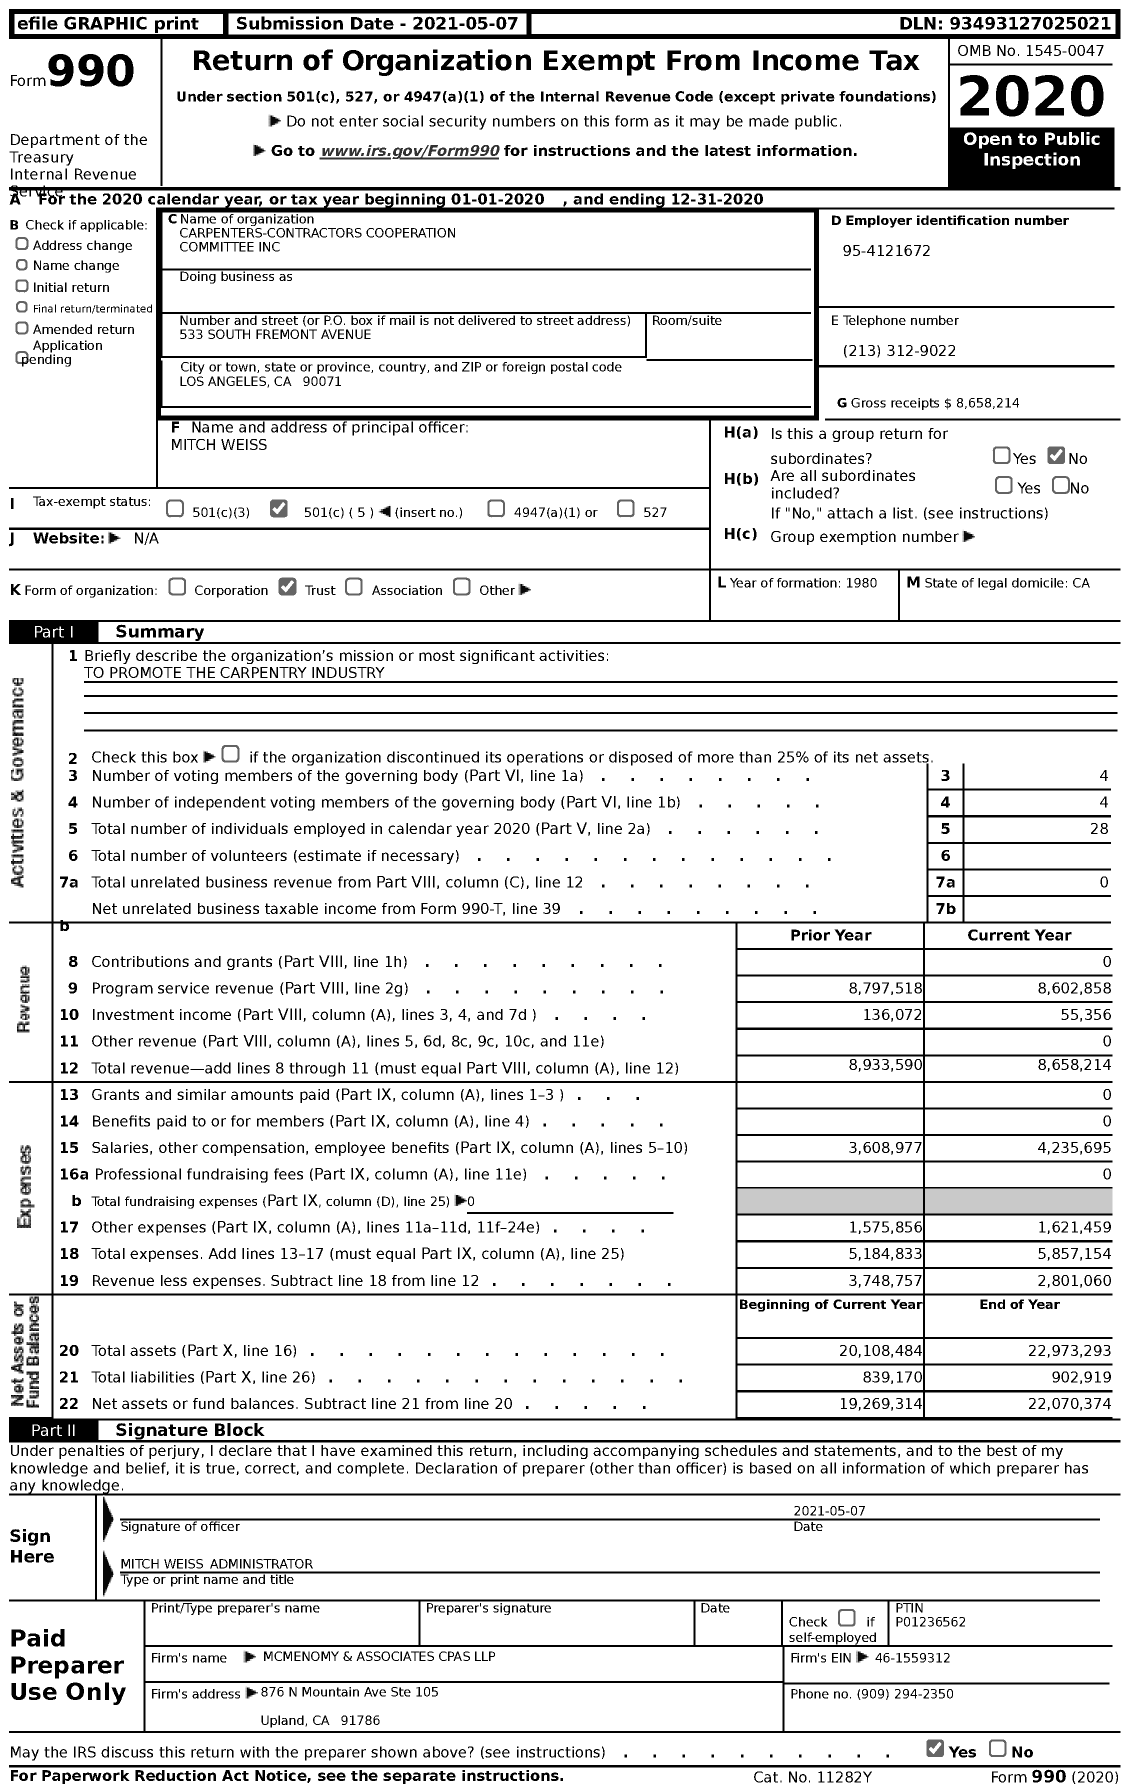 Image of first page of 2020 Form 990 for Carpenters-Contractors Cooperation Committee